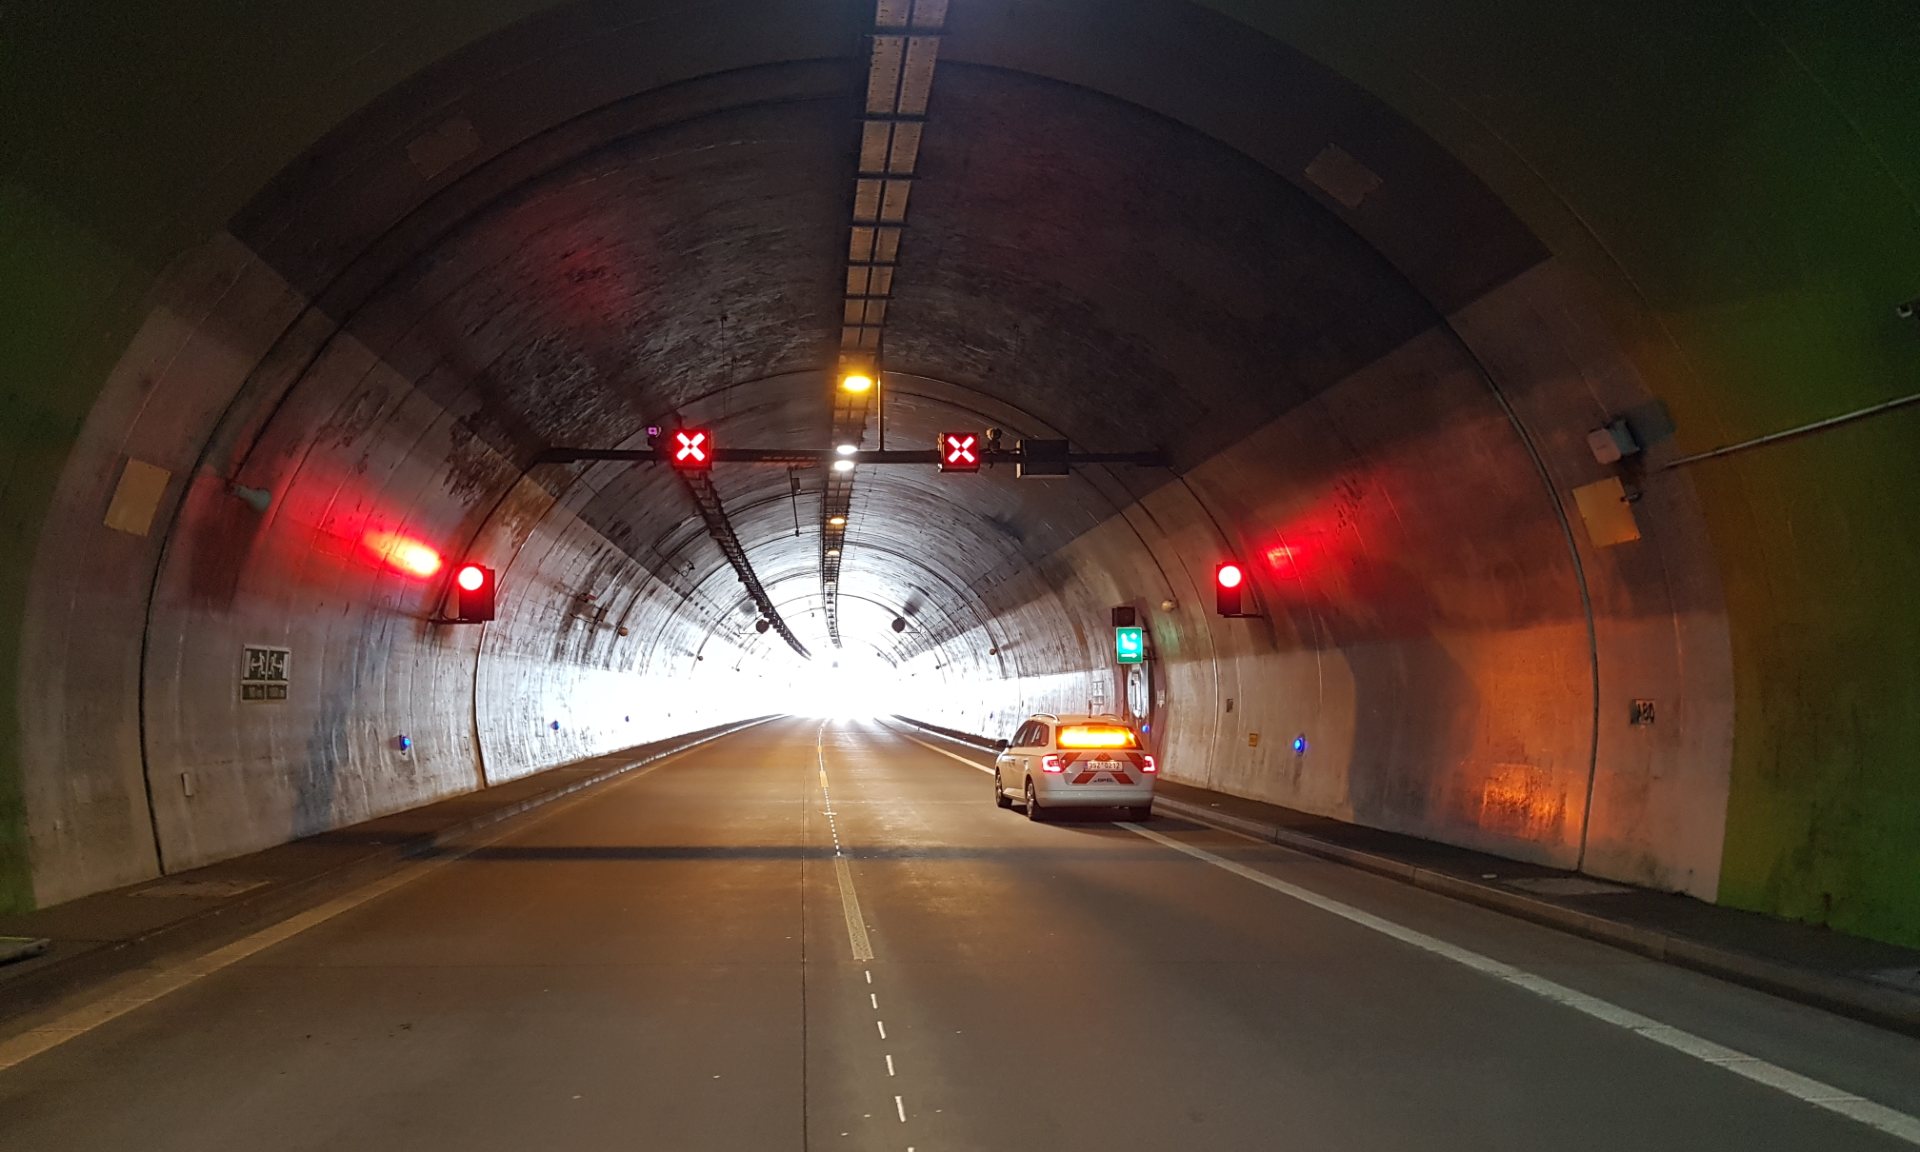 Dutch Company Siqura installs state-of-the-art camera technology in Czech motorway tunnels